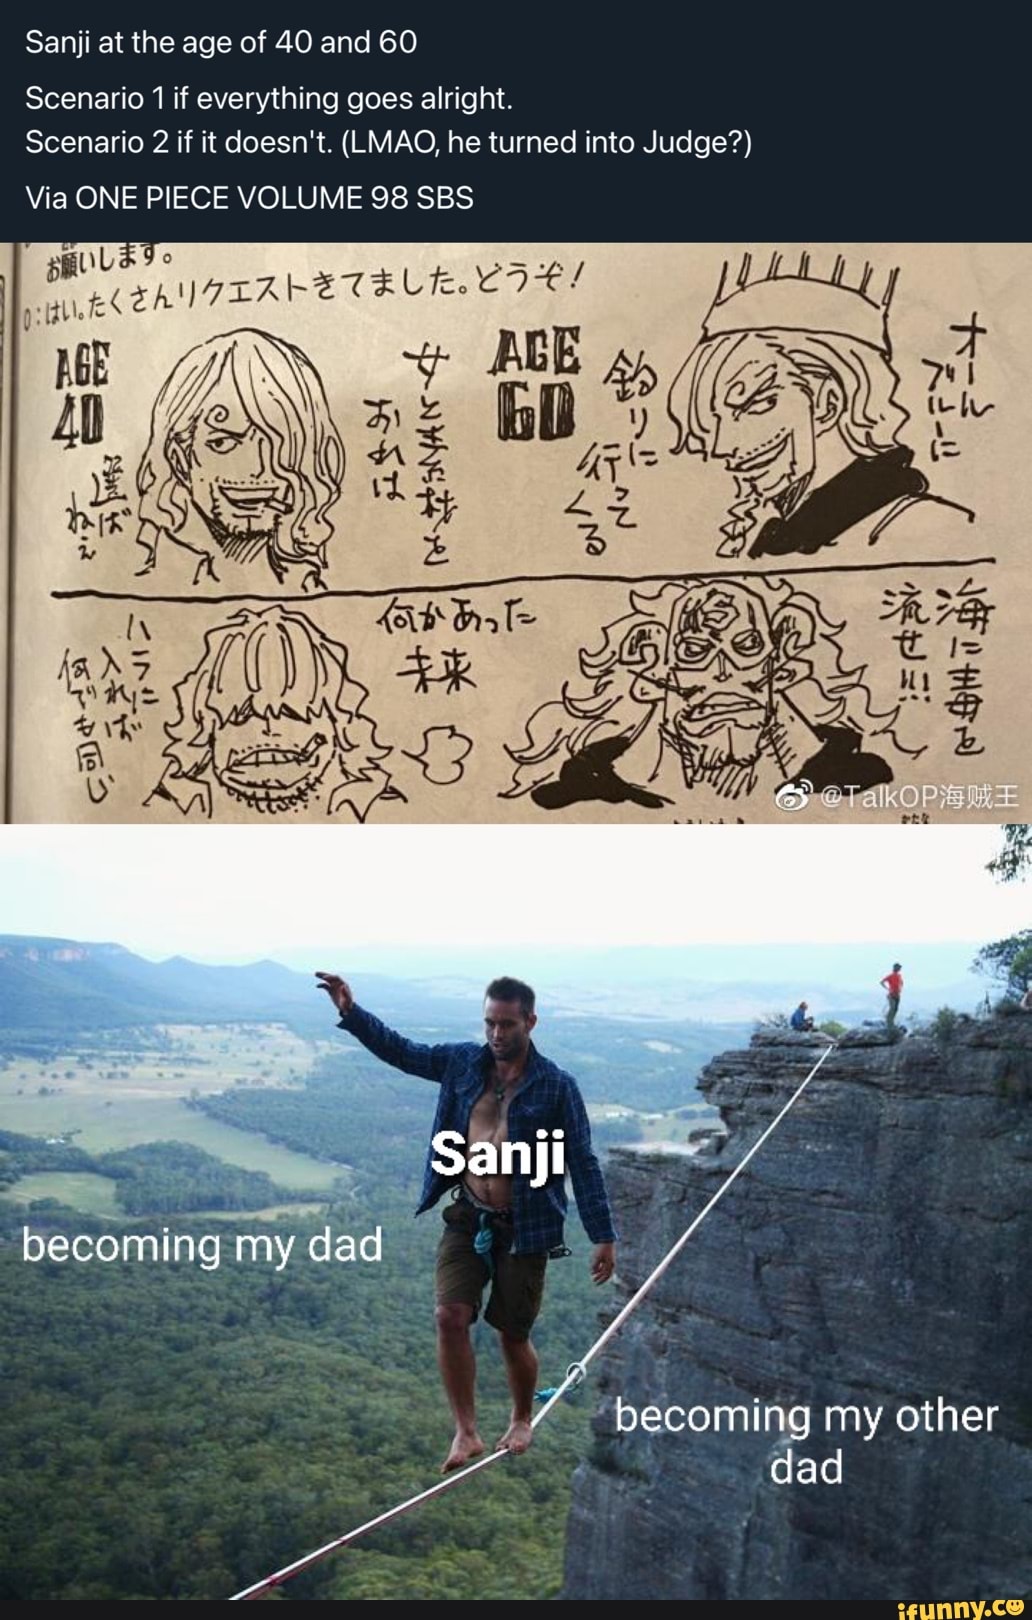 Sanji At The Age Of 40 And 60 Scenario 1 If Everything Goes Alright Scenario 2